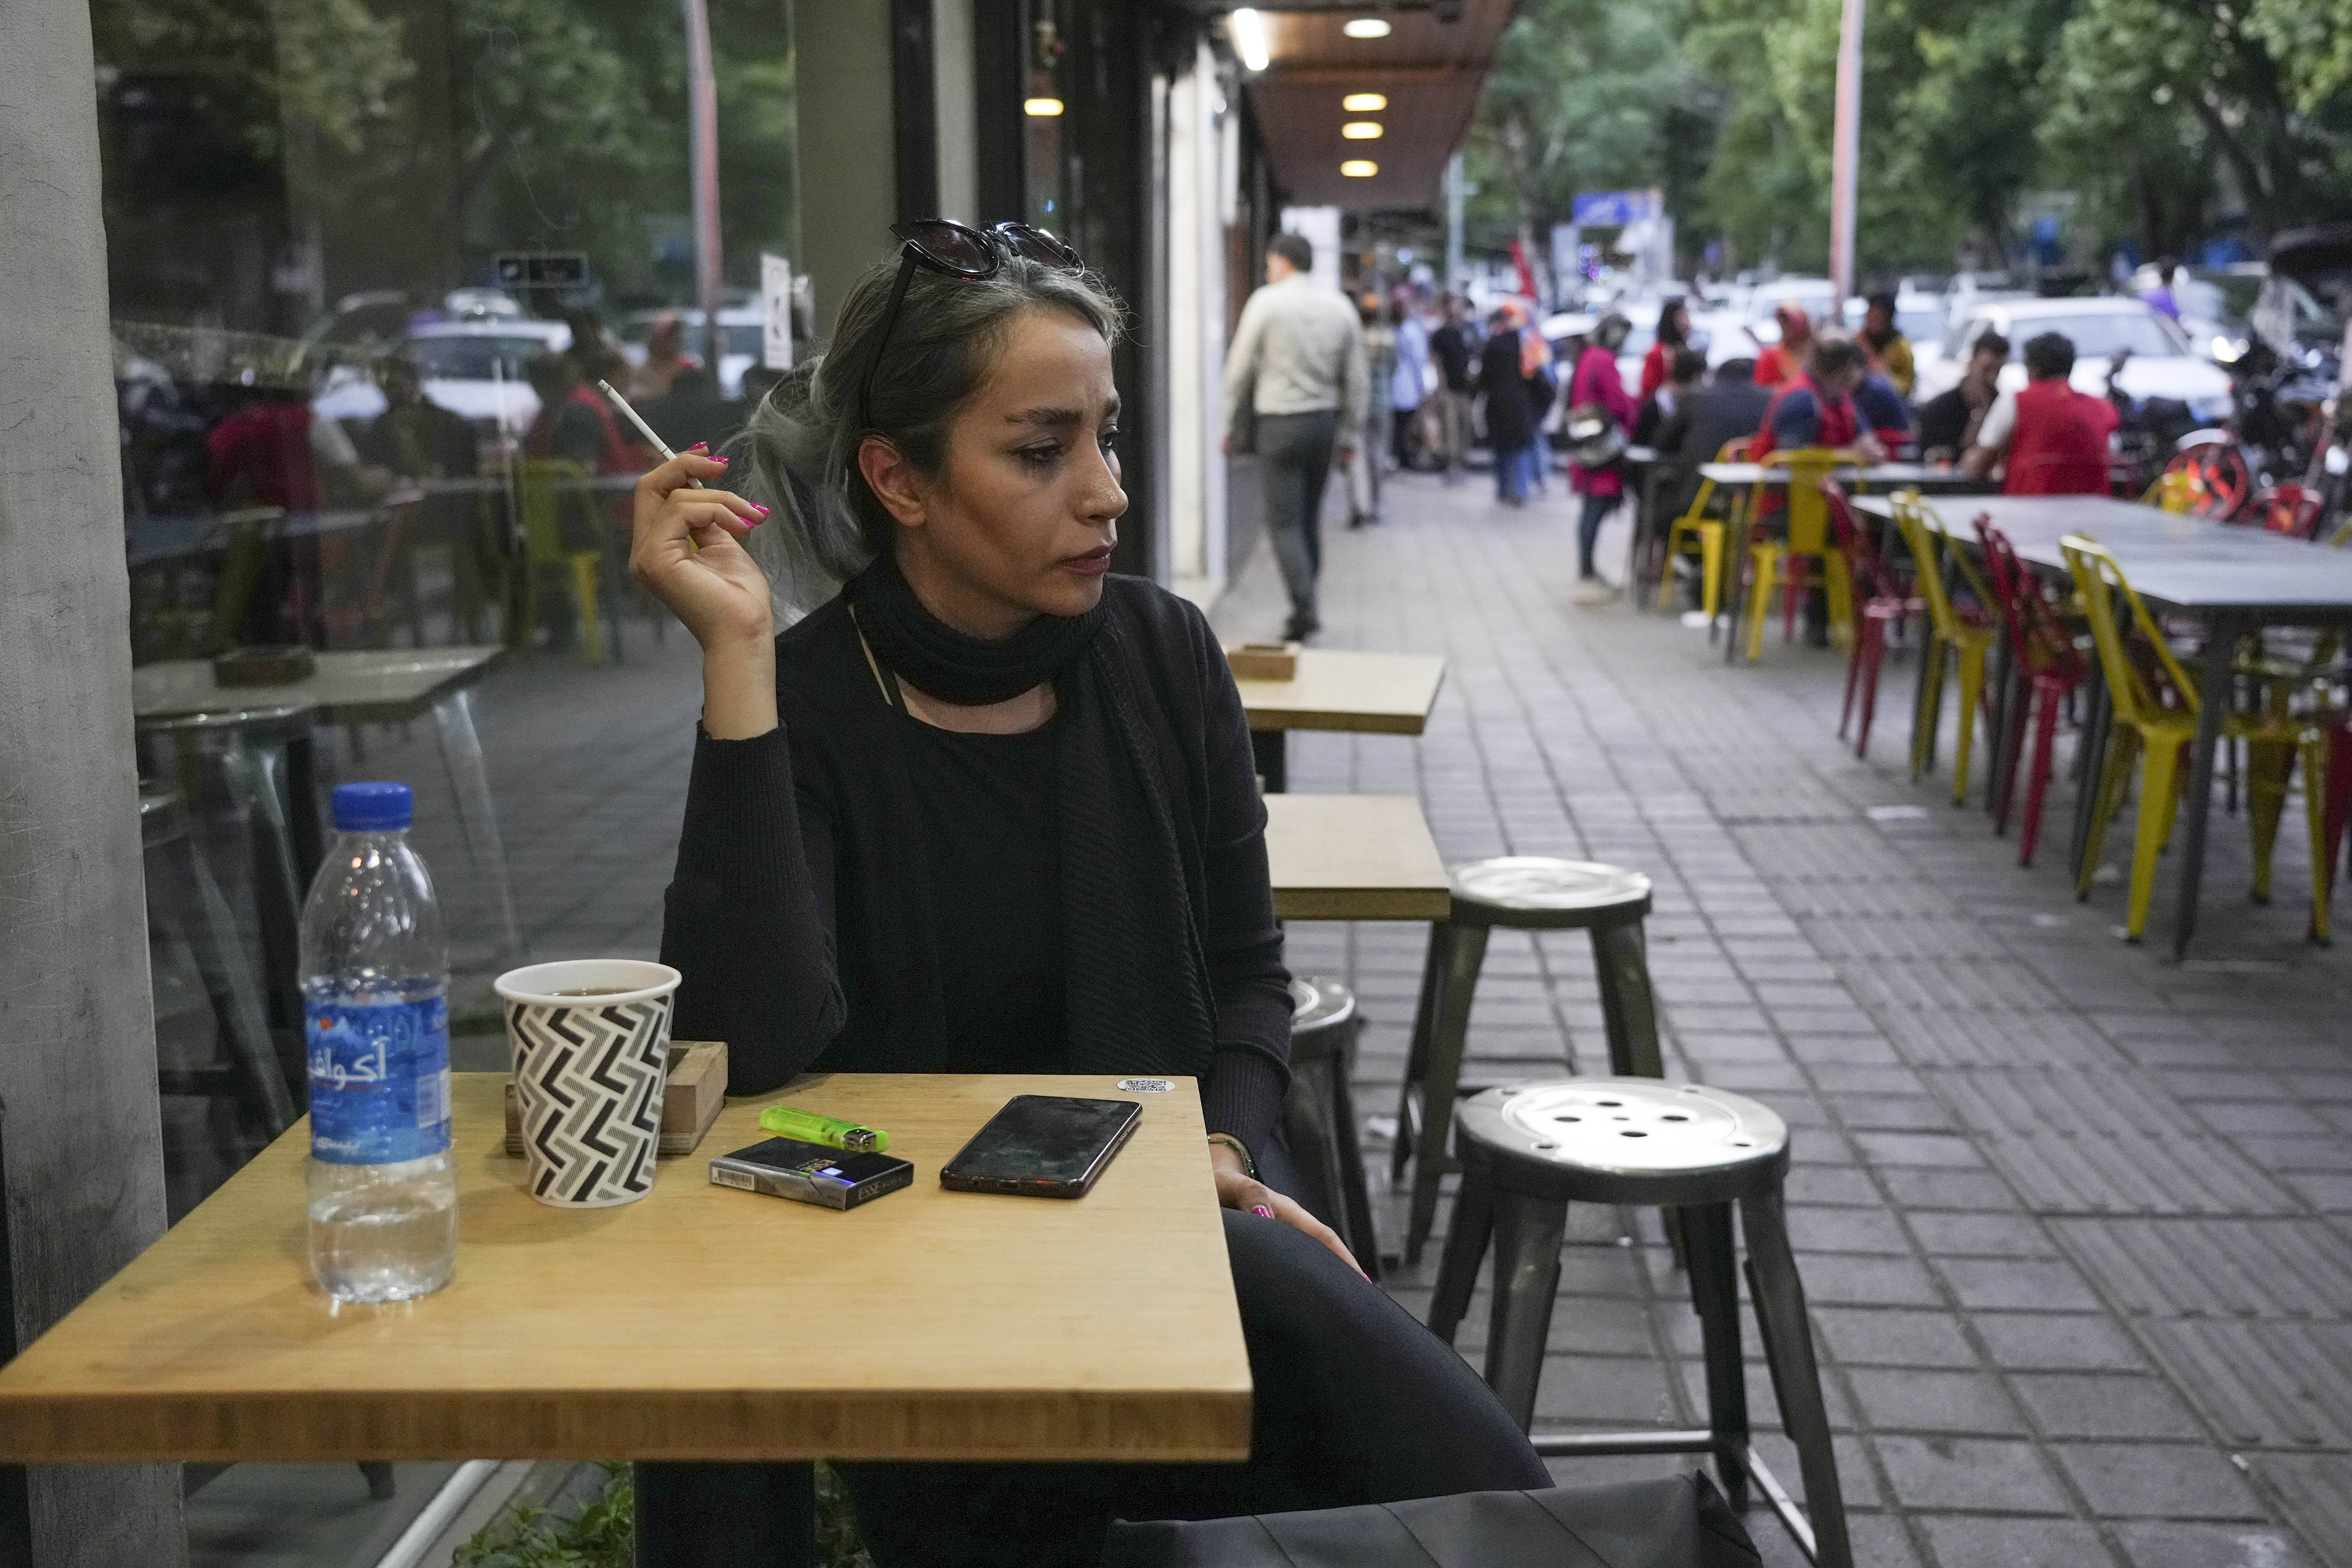 A woman sits in the alfresco dining area of a cafe at Tajrish commercial district without wearing her mandatory Islamic headscarf in northern Tehran, Iran